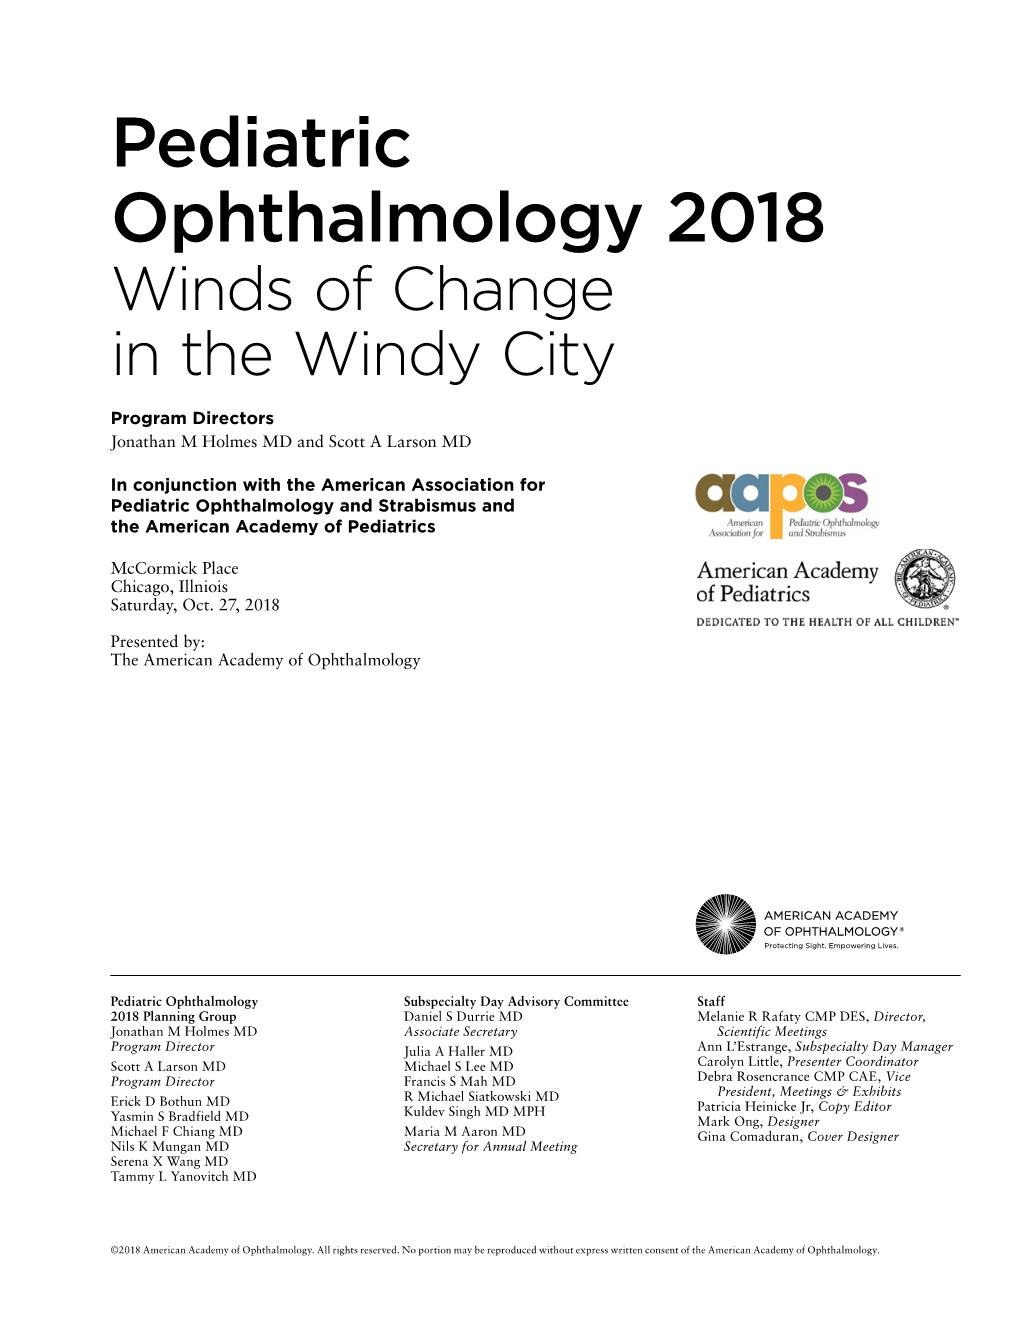 Pediatric Ophthalmology 2018 Winds of Change in the Windy City